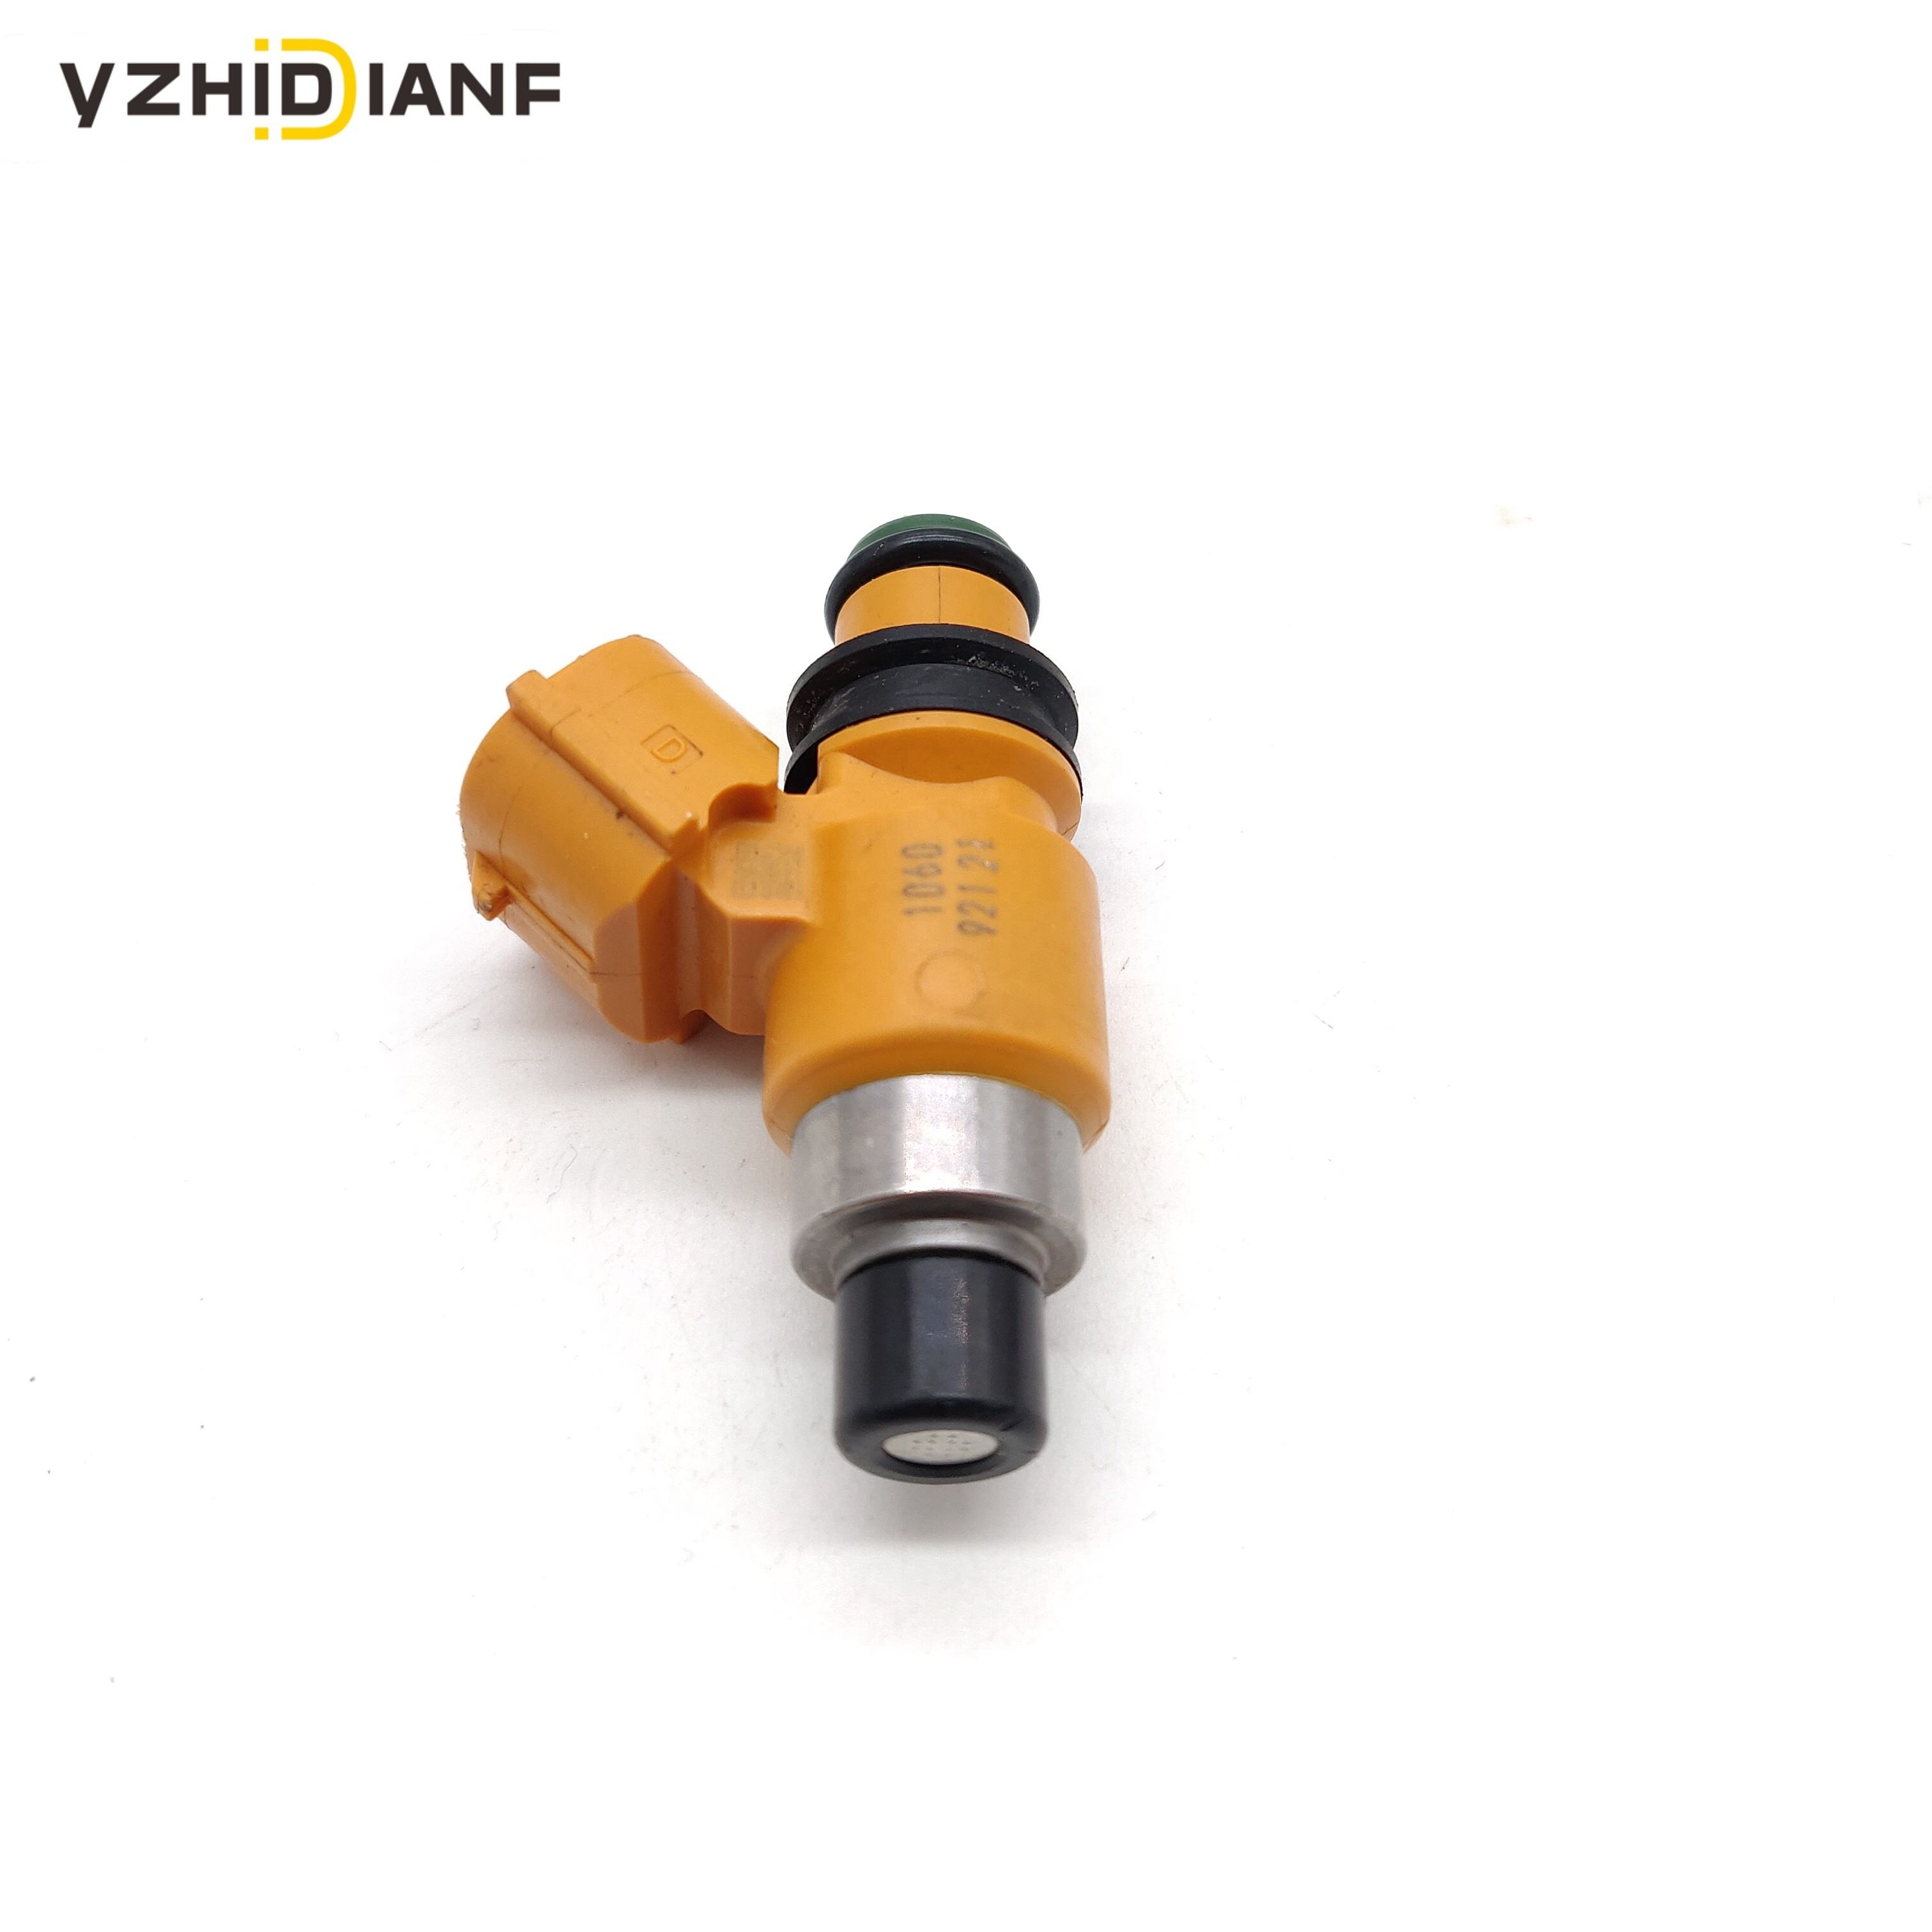 Wholesale High Impedance Gasoline Fuel Injector Nozzle CBR600RR 16450-Mee-D01 16450MEED01 For 2005-2006 Honda CBR 